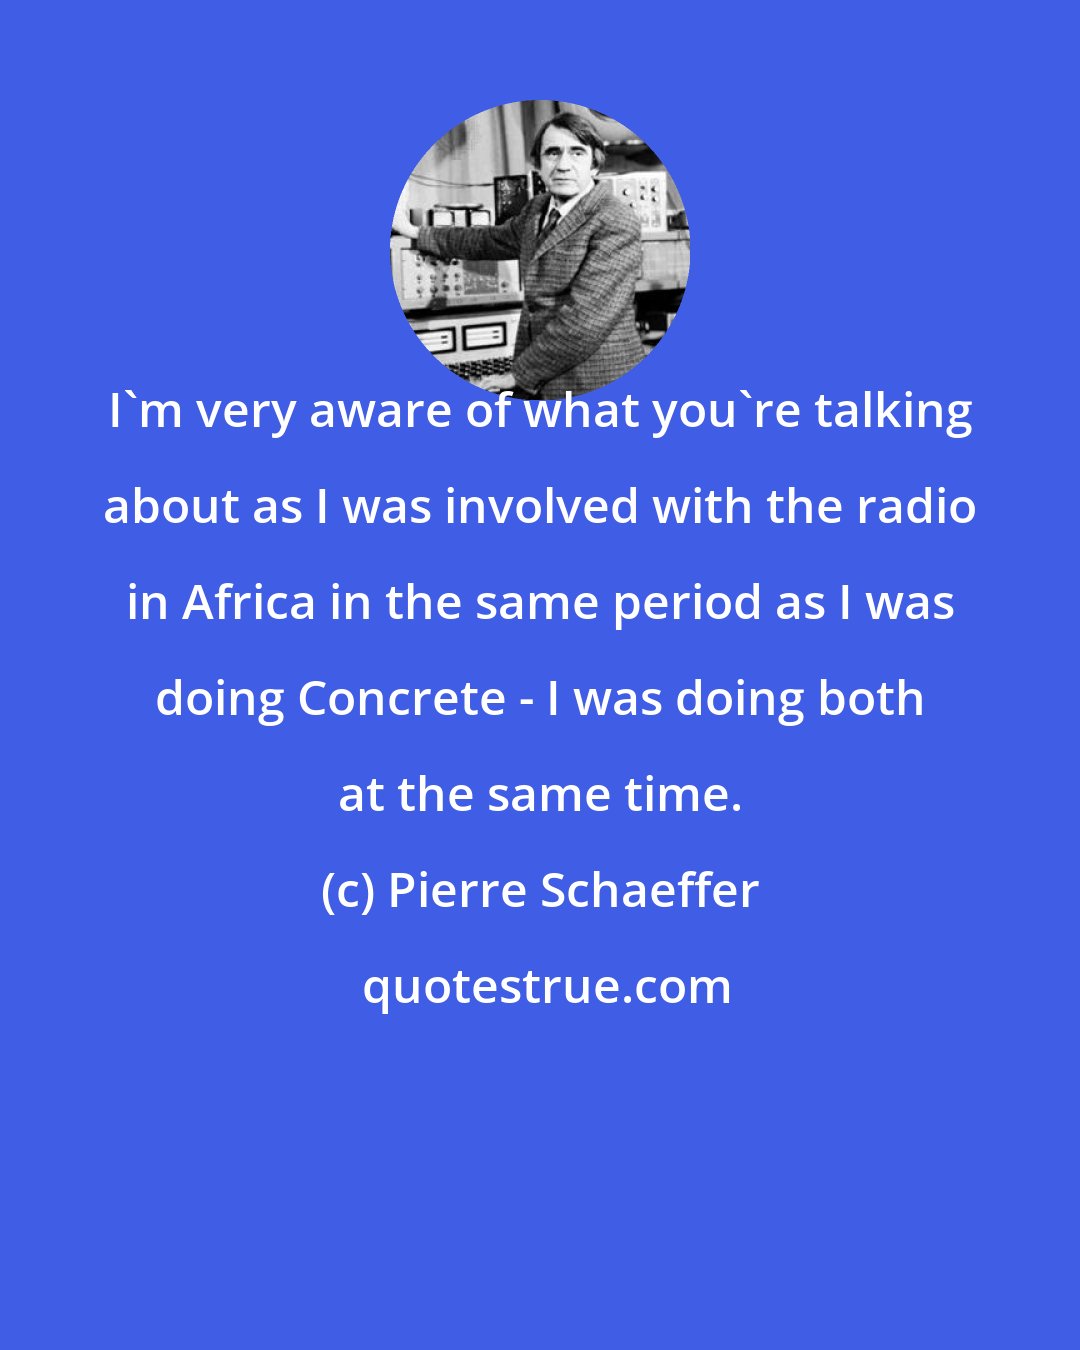 Pierre Schaeffer: I'm very aware of what you're talking about as I was involved with the radio in Africa in the same period as I was doing Concrete - I was doing both at the same time.